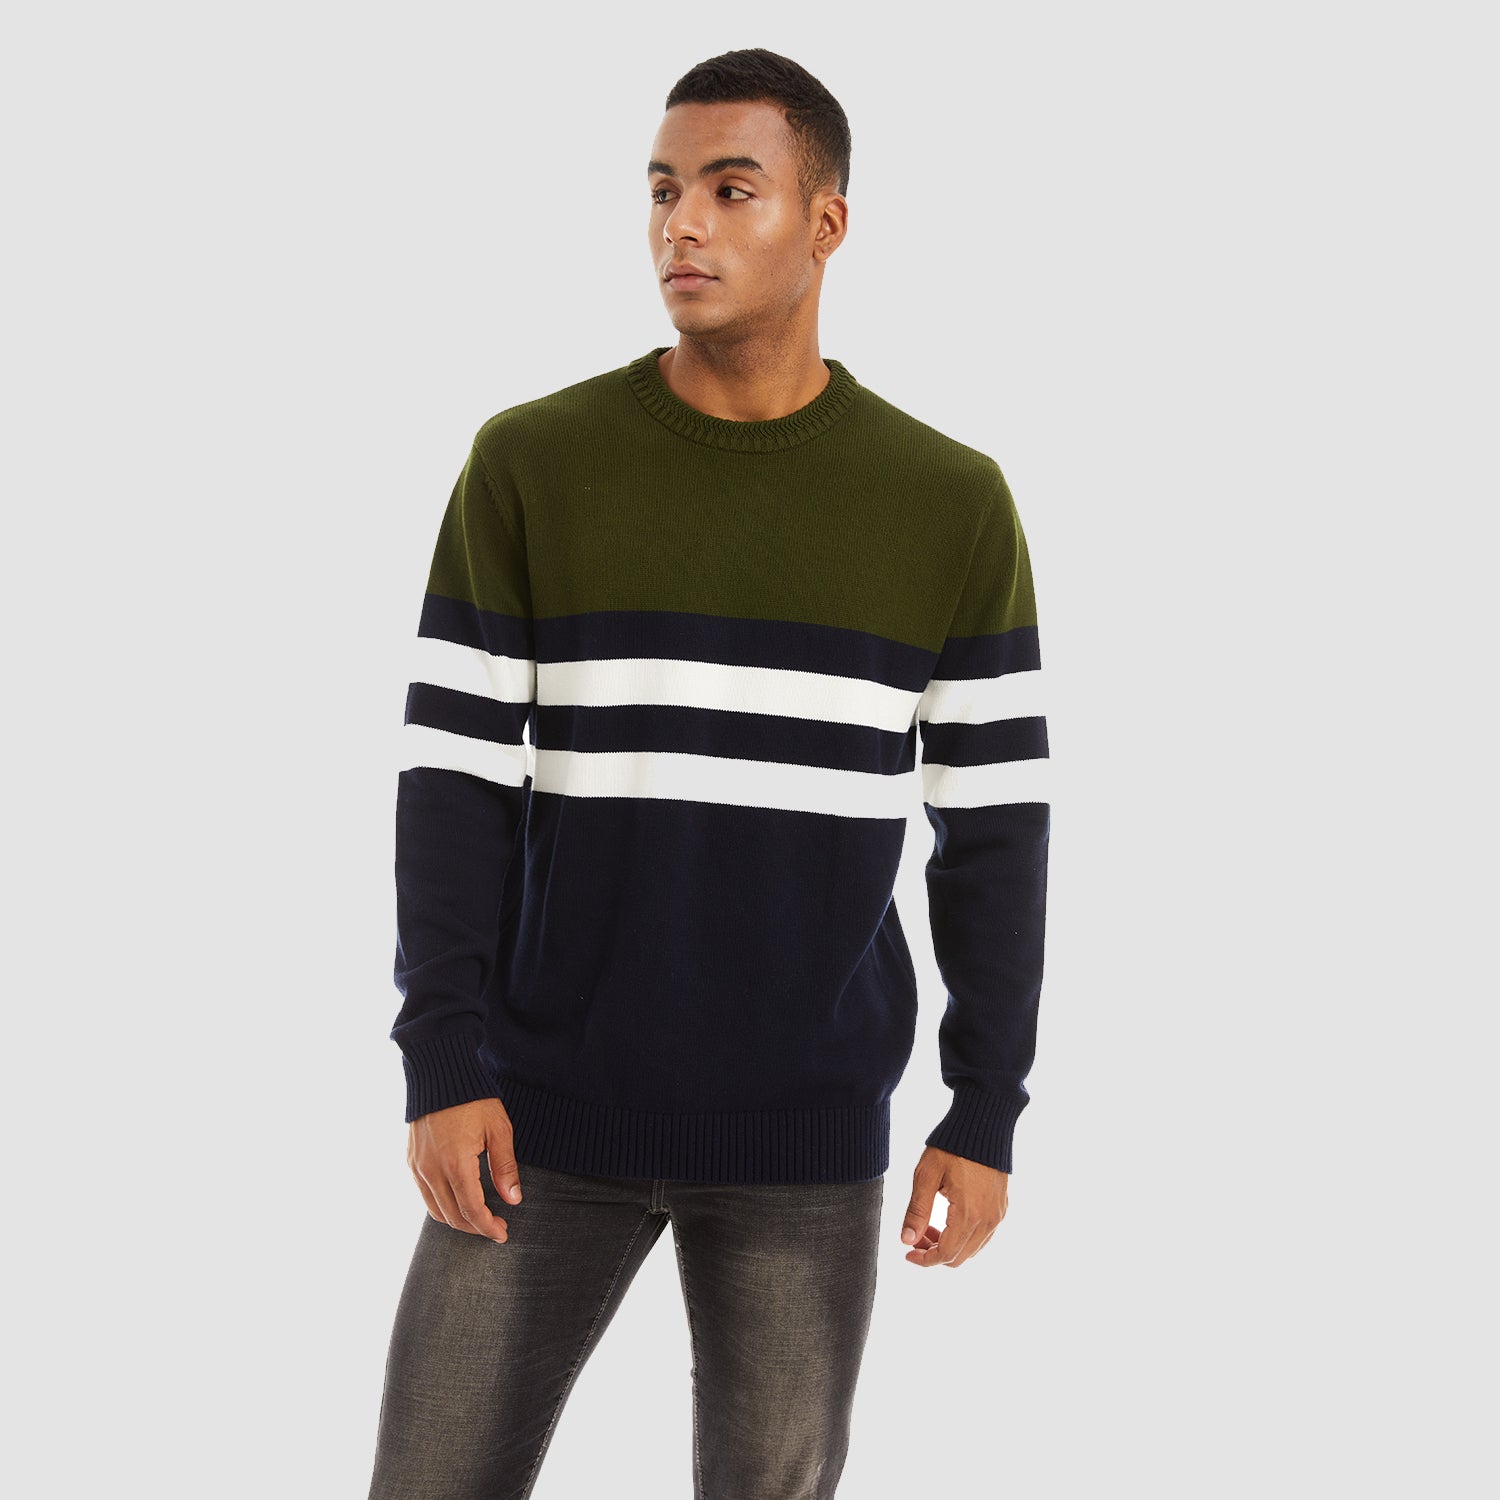 Men's Crewneck Sweater Soft Thermal Knitted Sweatshirt Color Block Striped